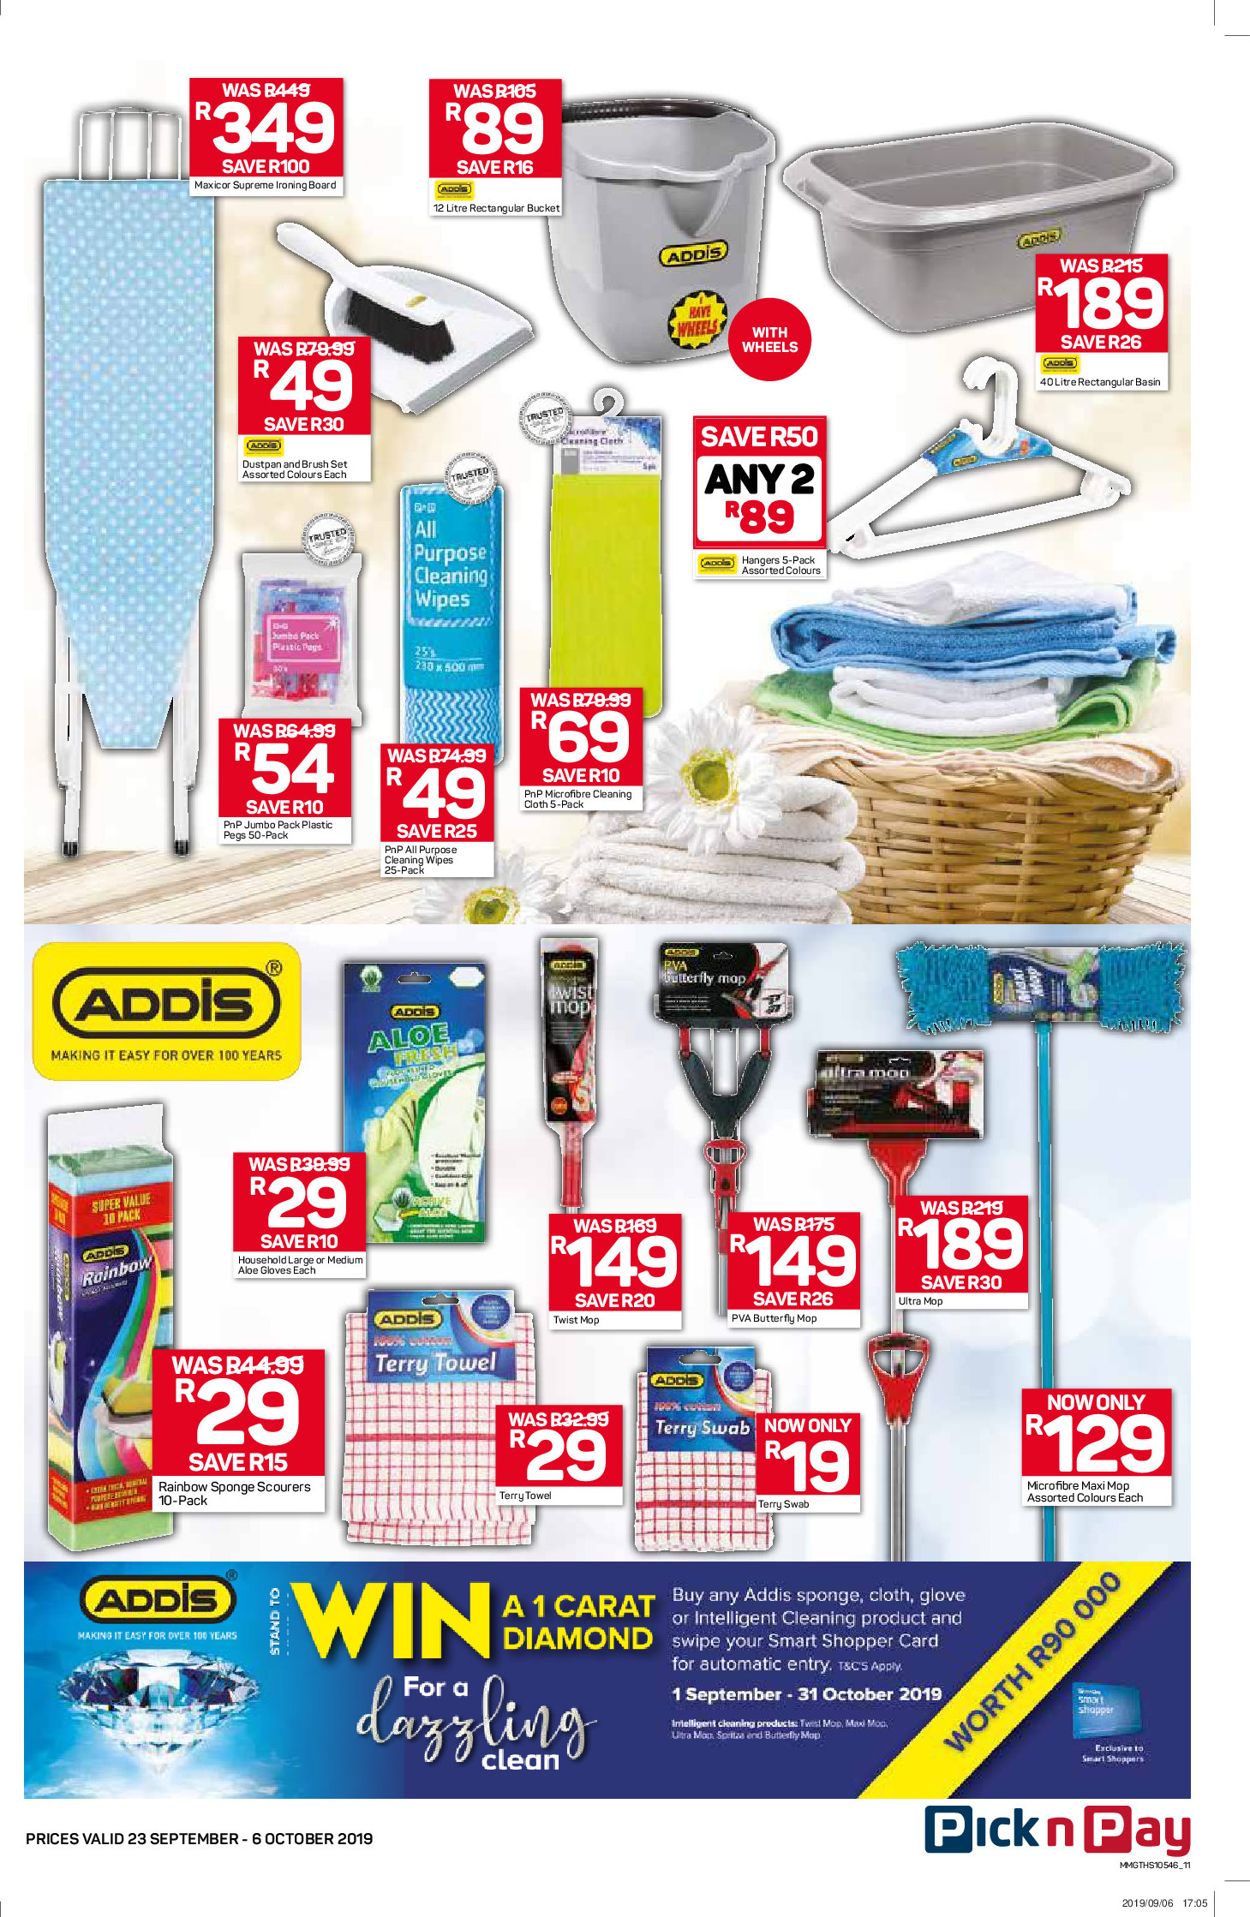 Pick n Pay Catalogue - 2019/09/23-2019/10/06 (Page 12)